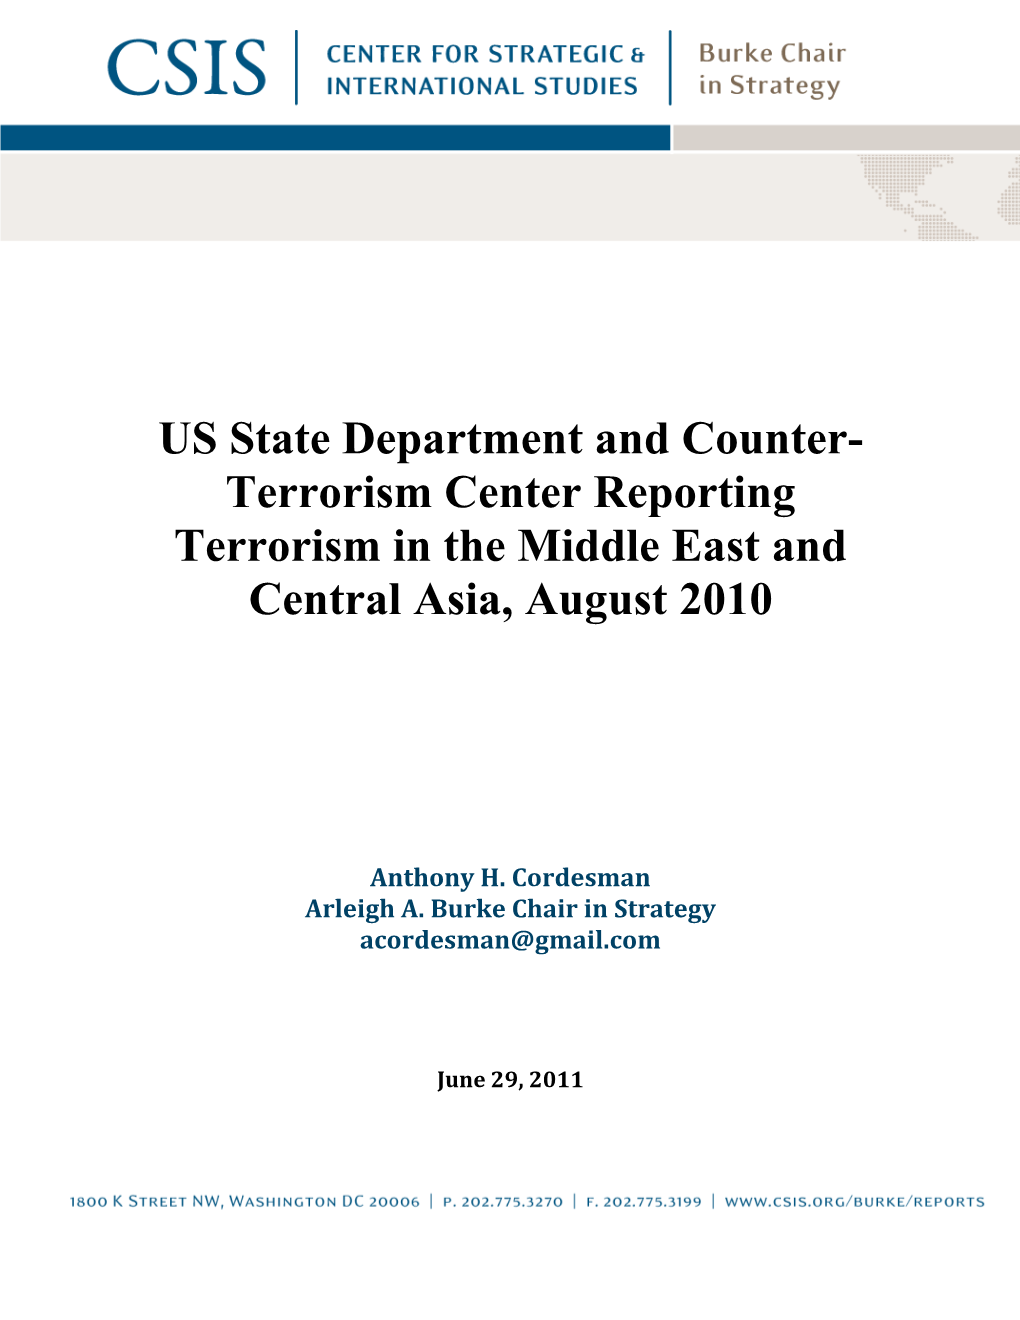 US State Department and Counter- Terrorism Center Reporting Terrorism in the Middle East and Central Asia, August 2010